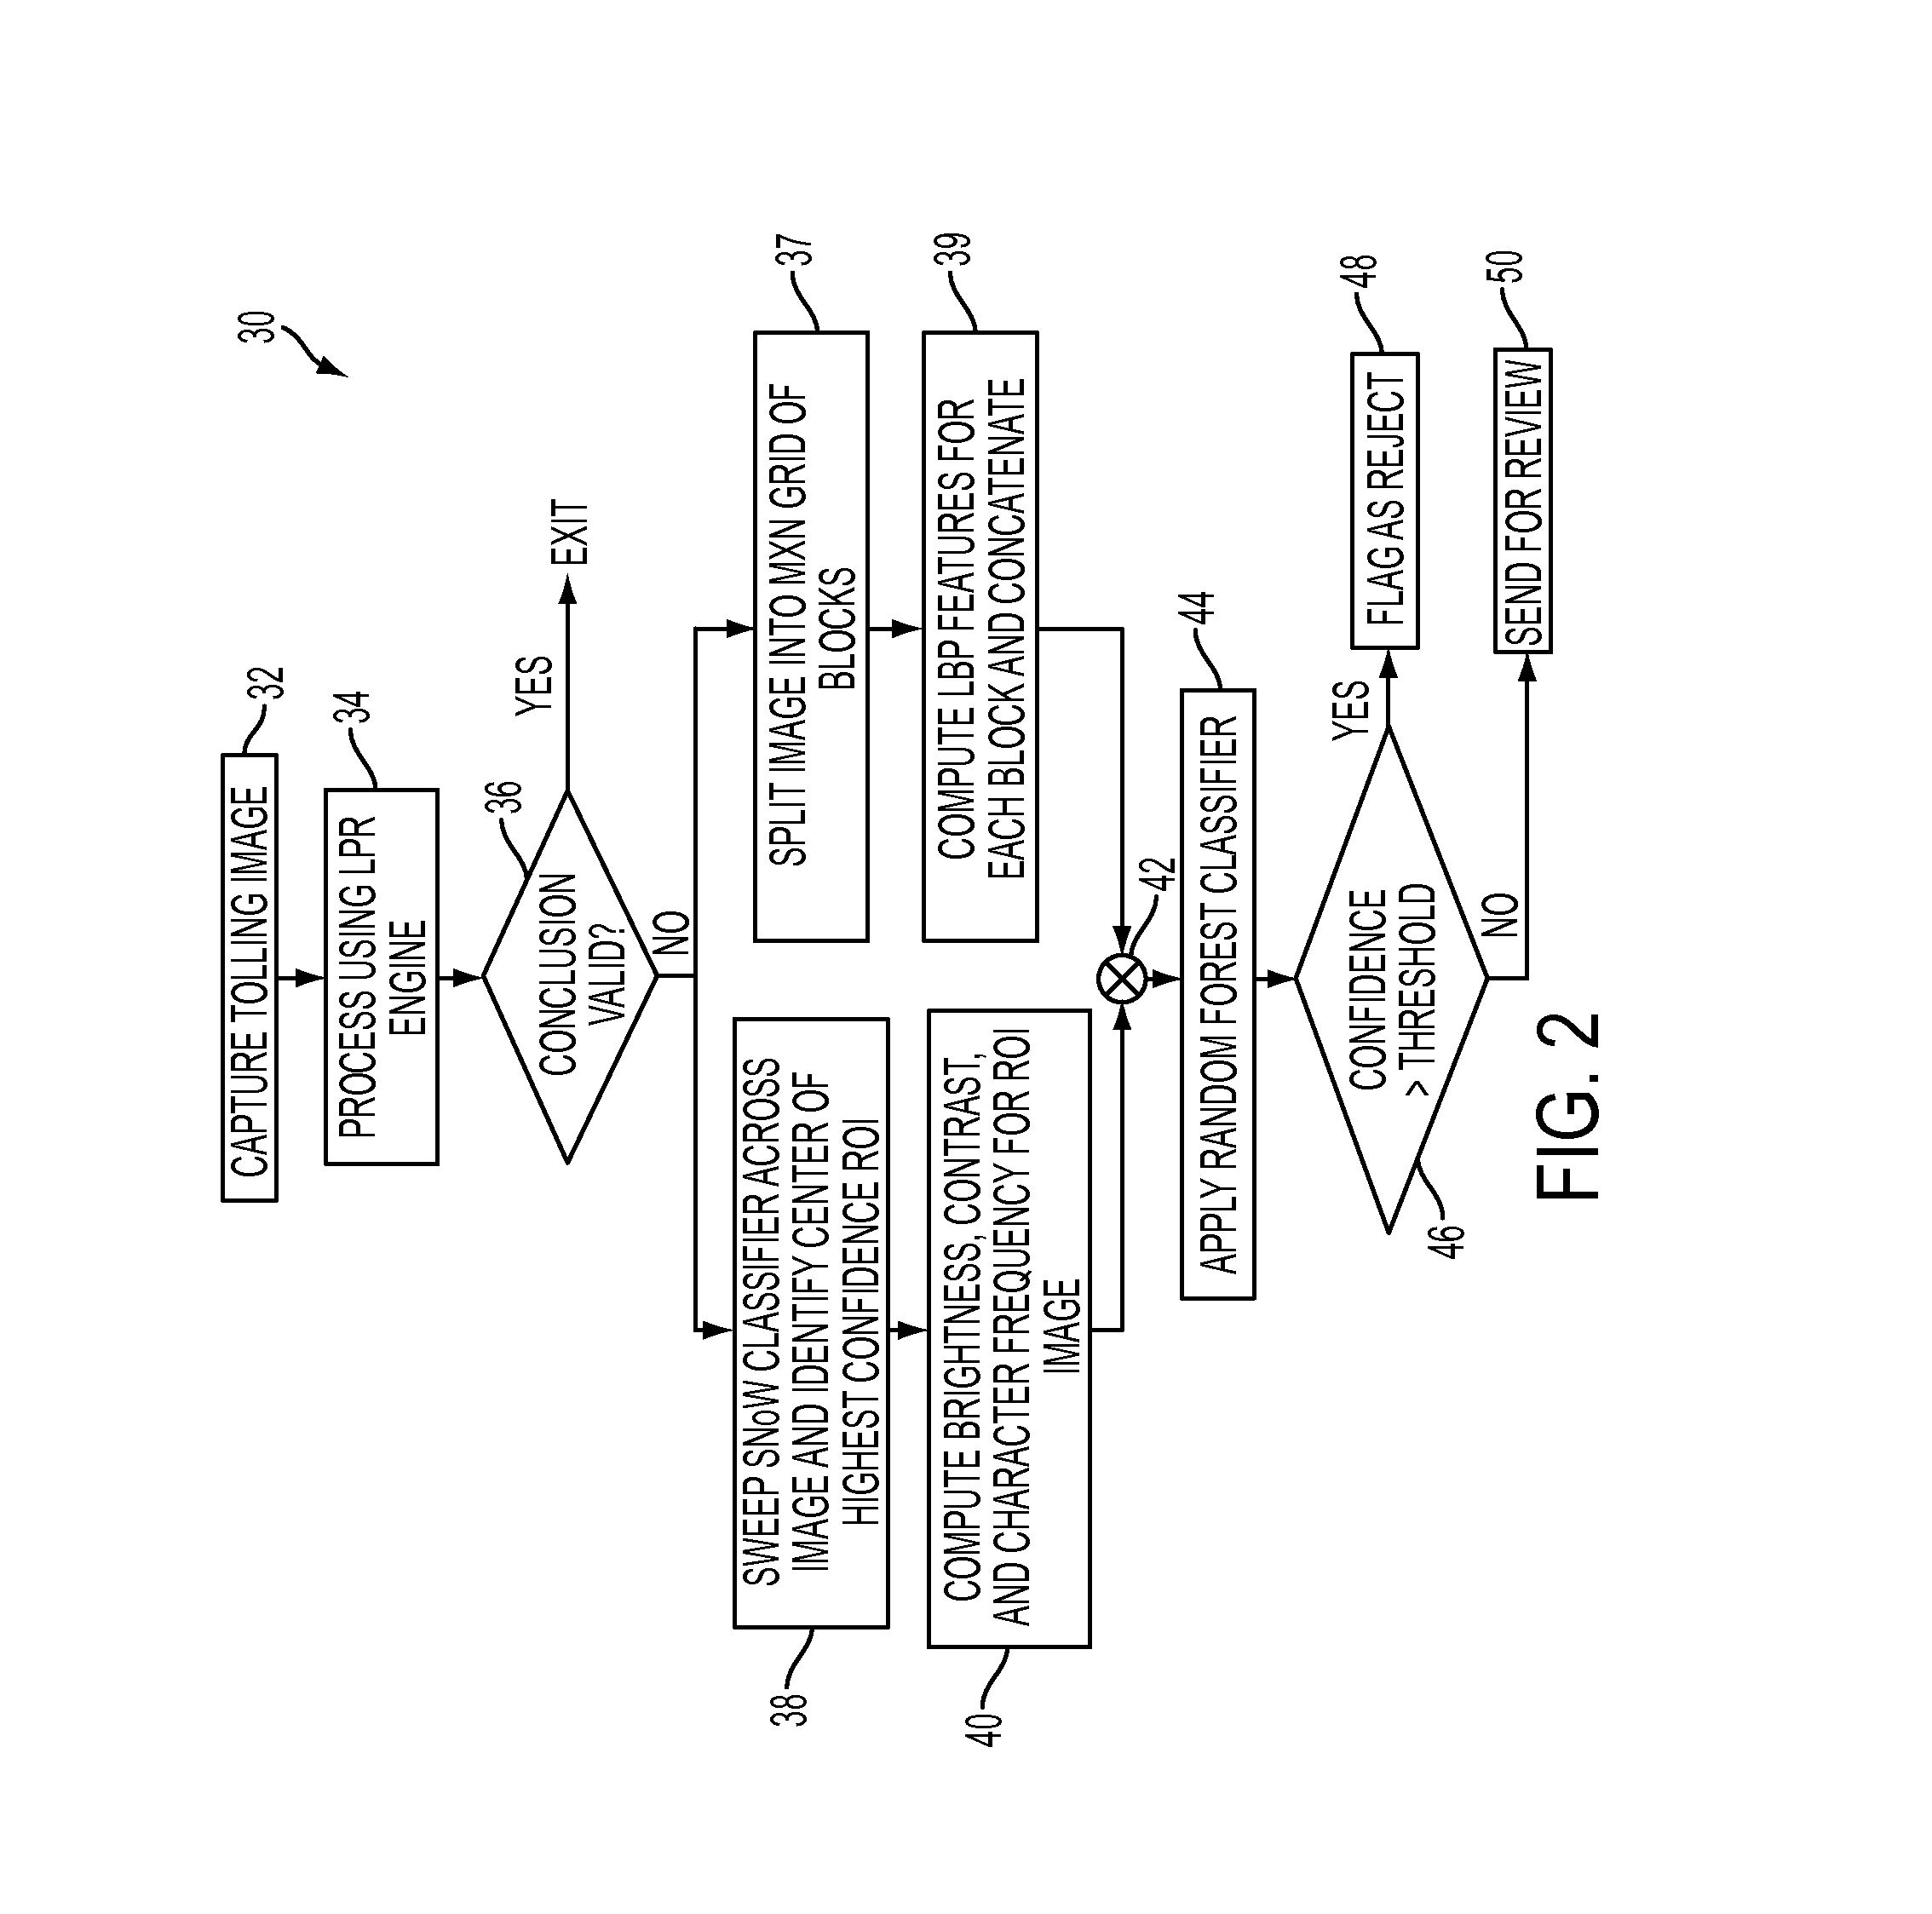 Method and system for automating an image rejection process